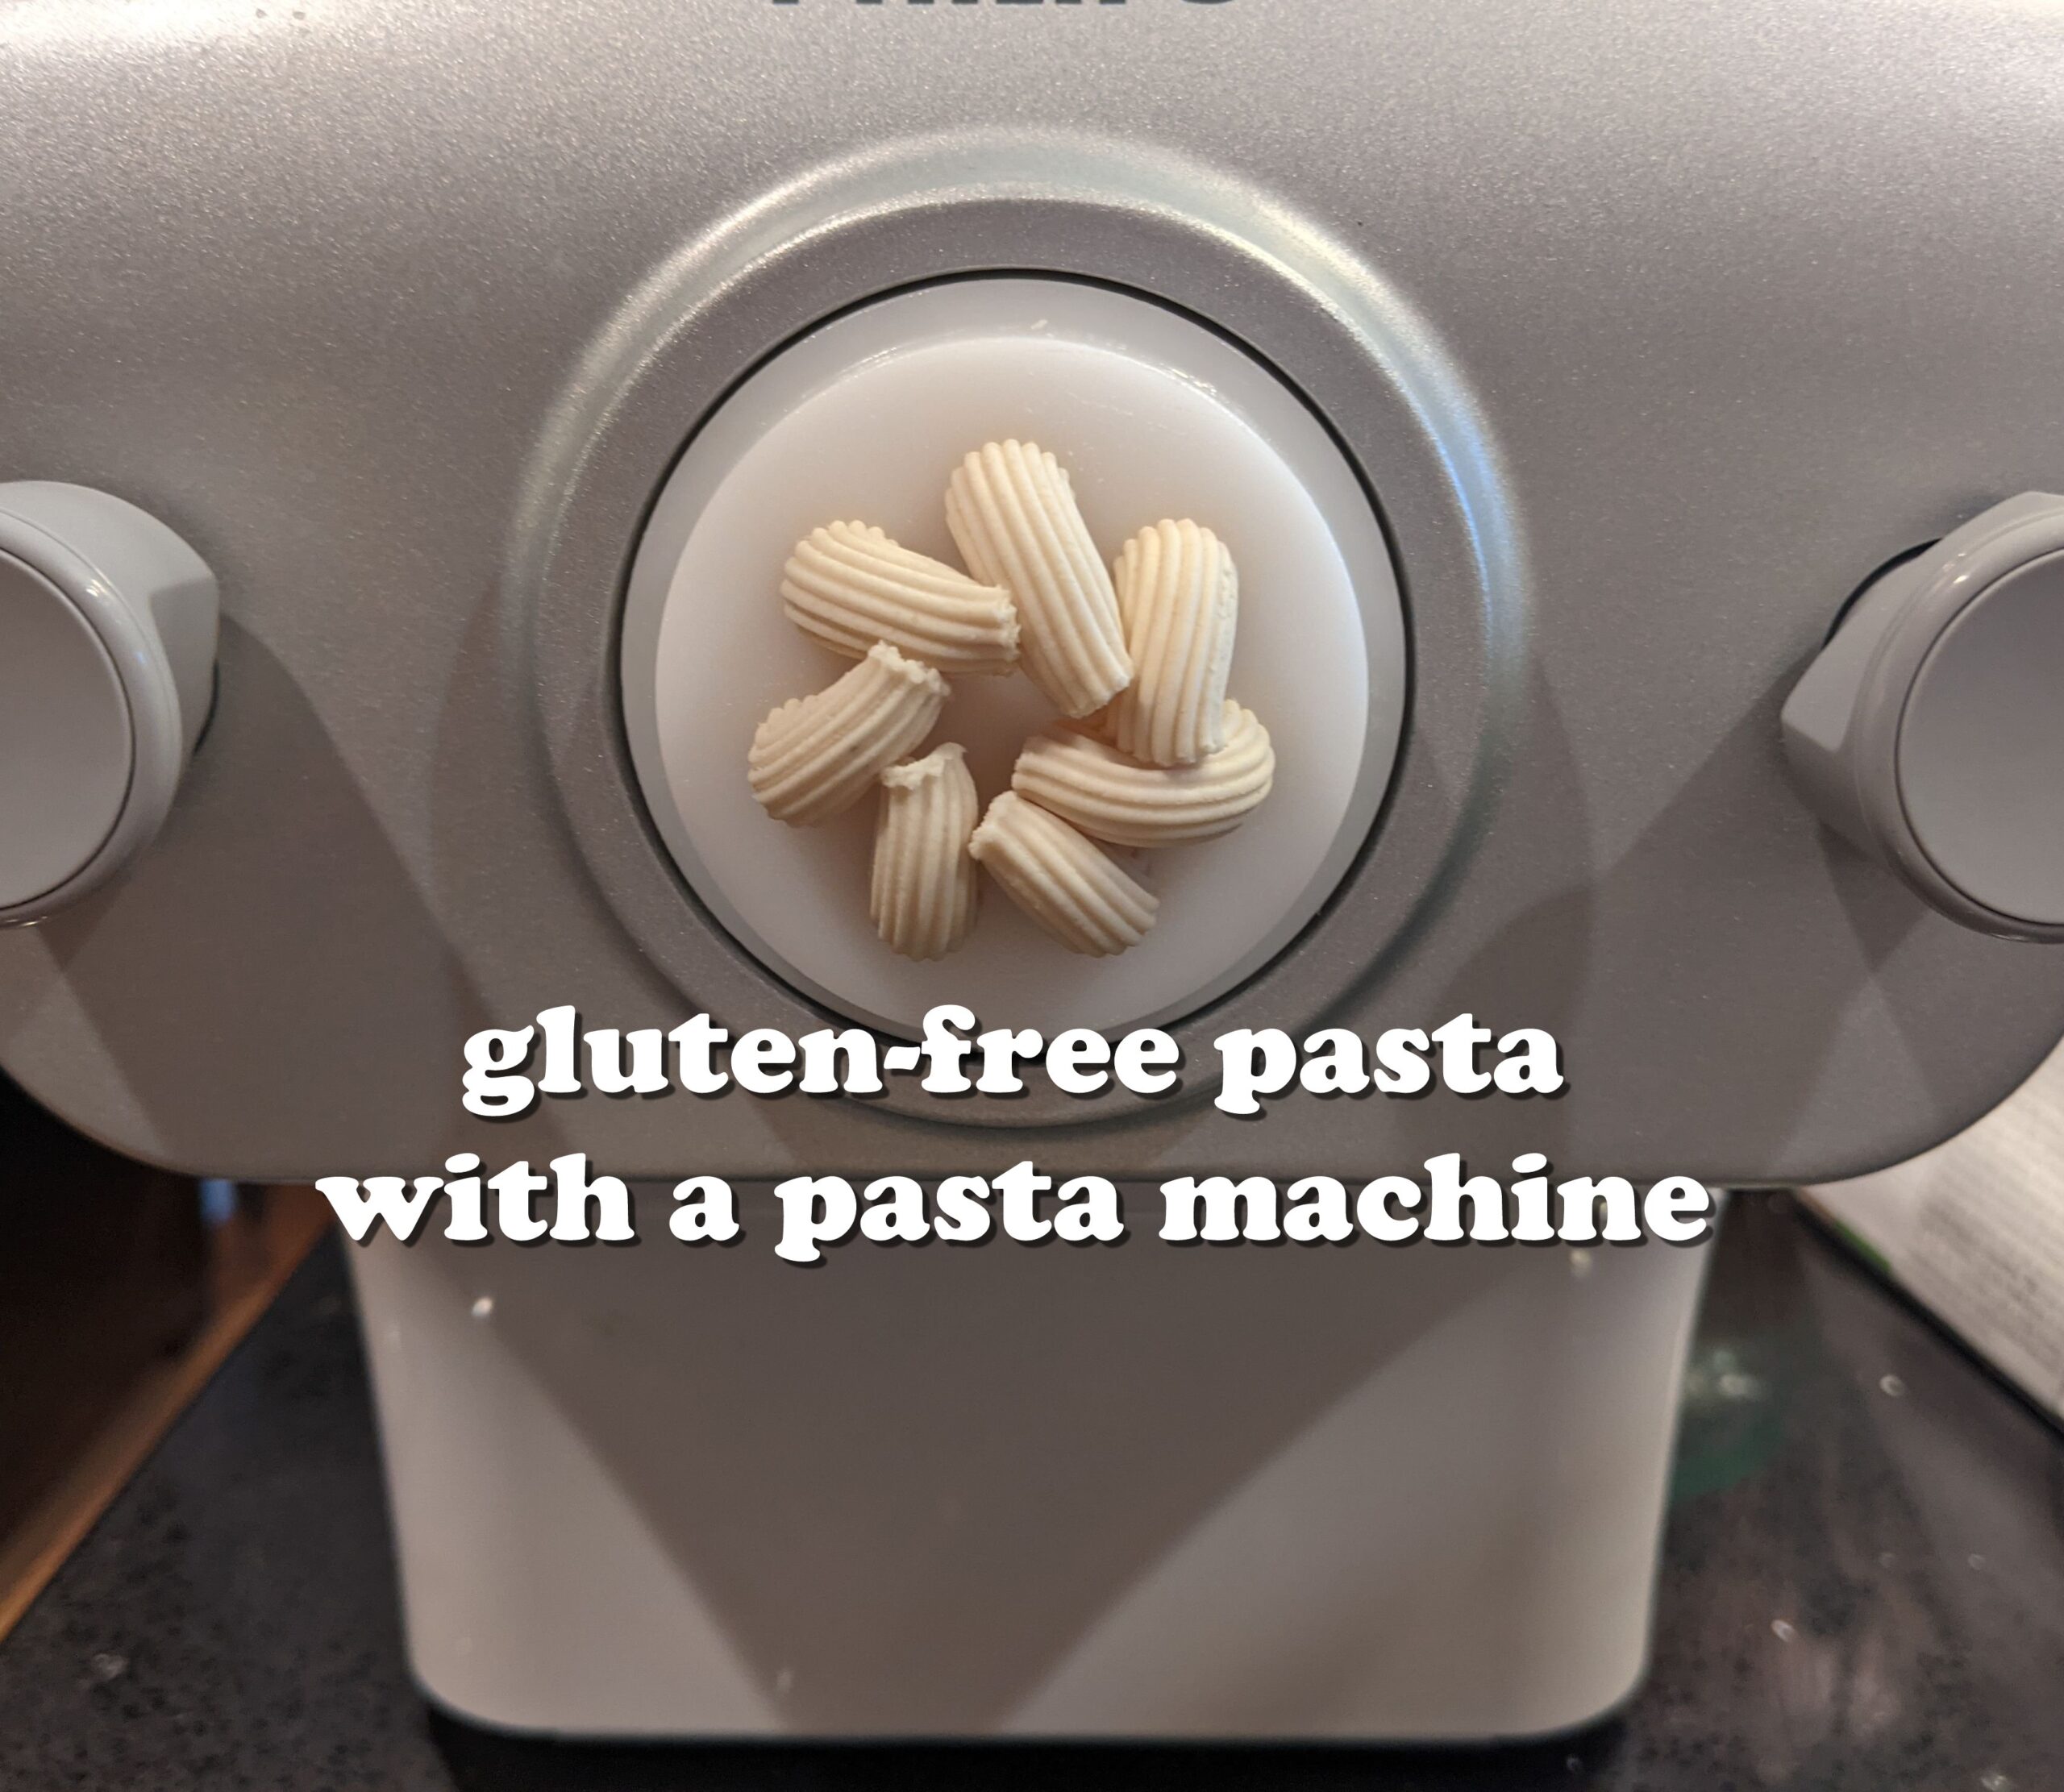 Make Effortless Italian with Philips' Pasta & Noodle Maker Plus